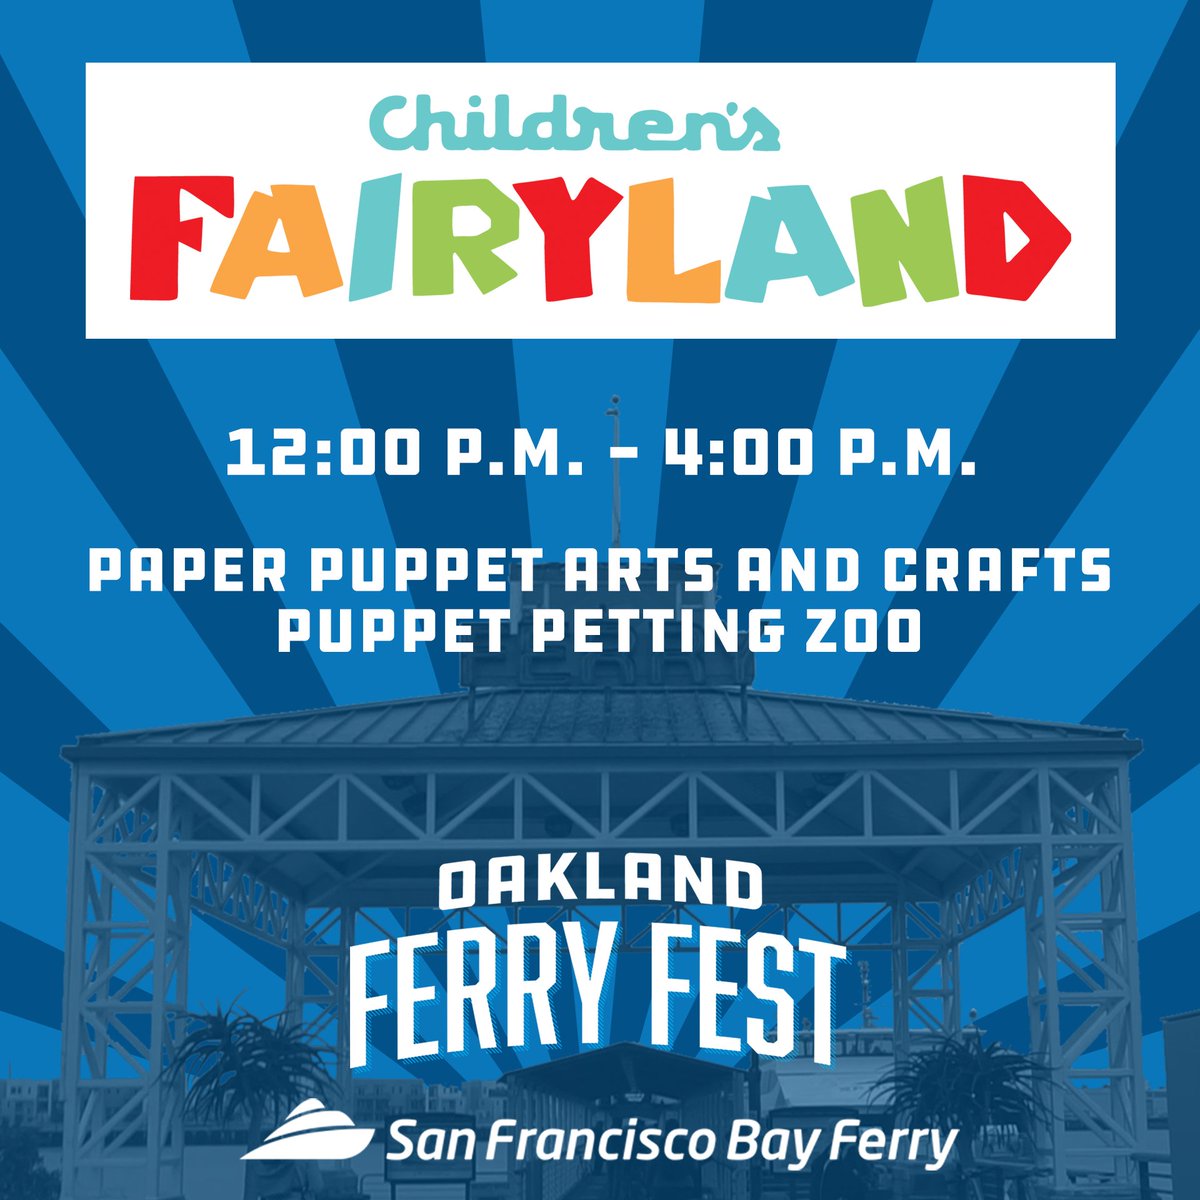 Coming to Oakland Ferry Fest on June 1? On top of free ferry rides, check out the kids activity area hosted by @FairylandCA from noon to 4:00 p.m. Kids will get to make puppet arts and crafts and play with a puppet petting zoo. Full details at sfbf.mobi/oakland-ferry-….